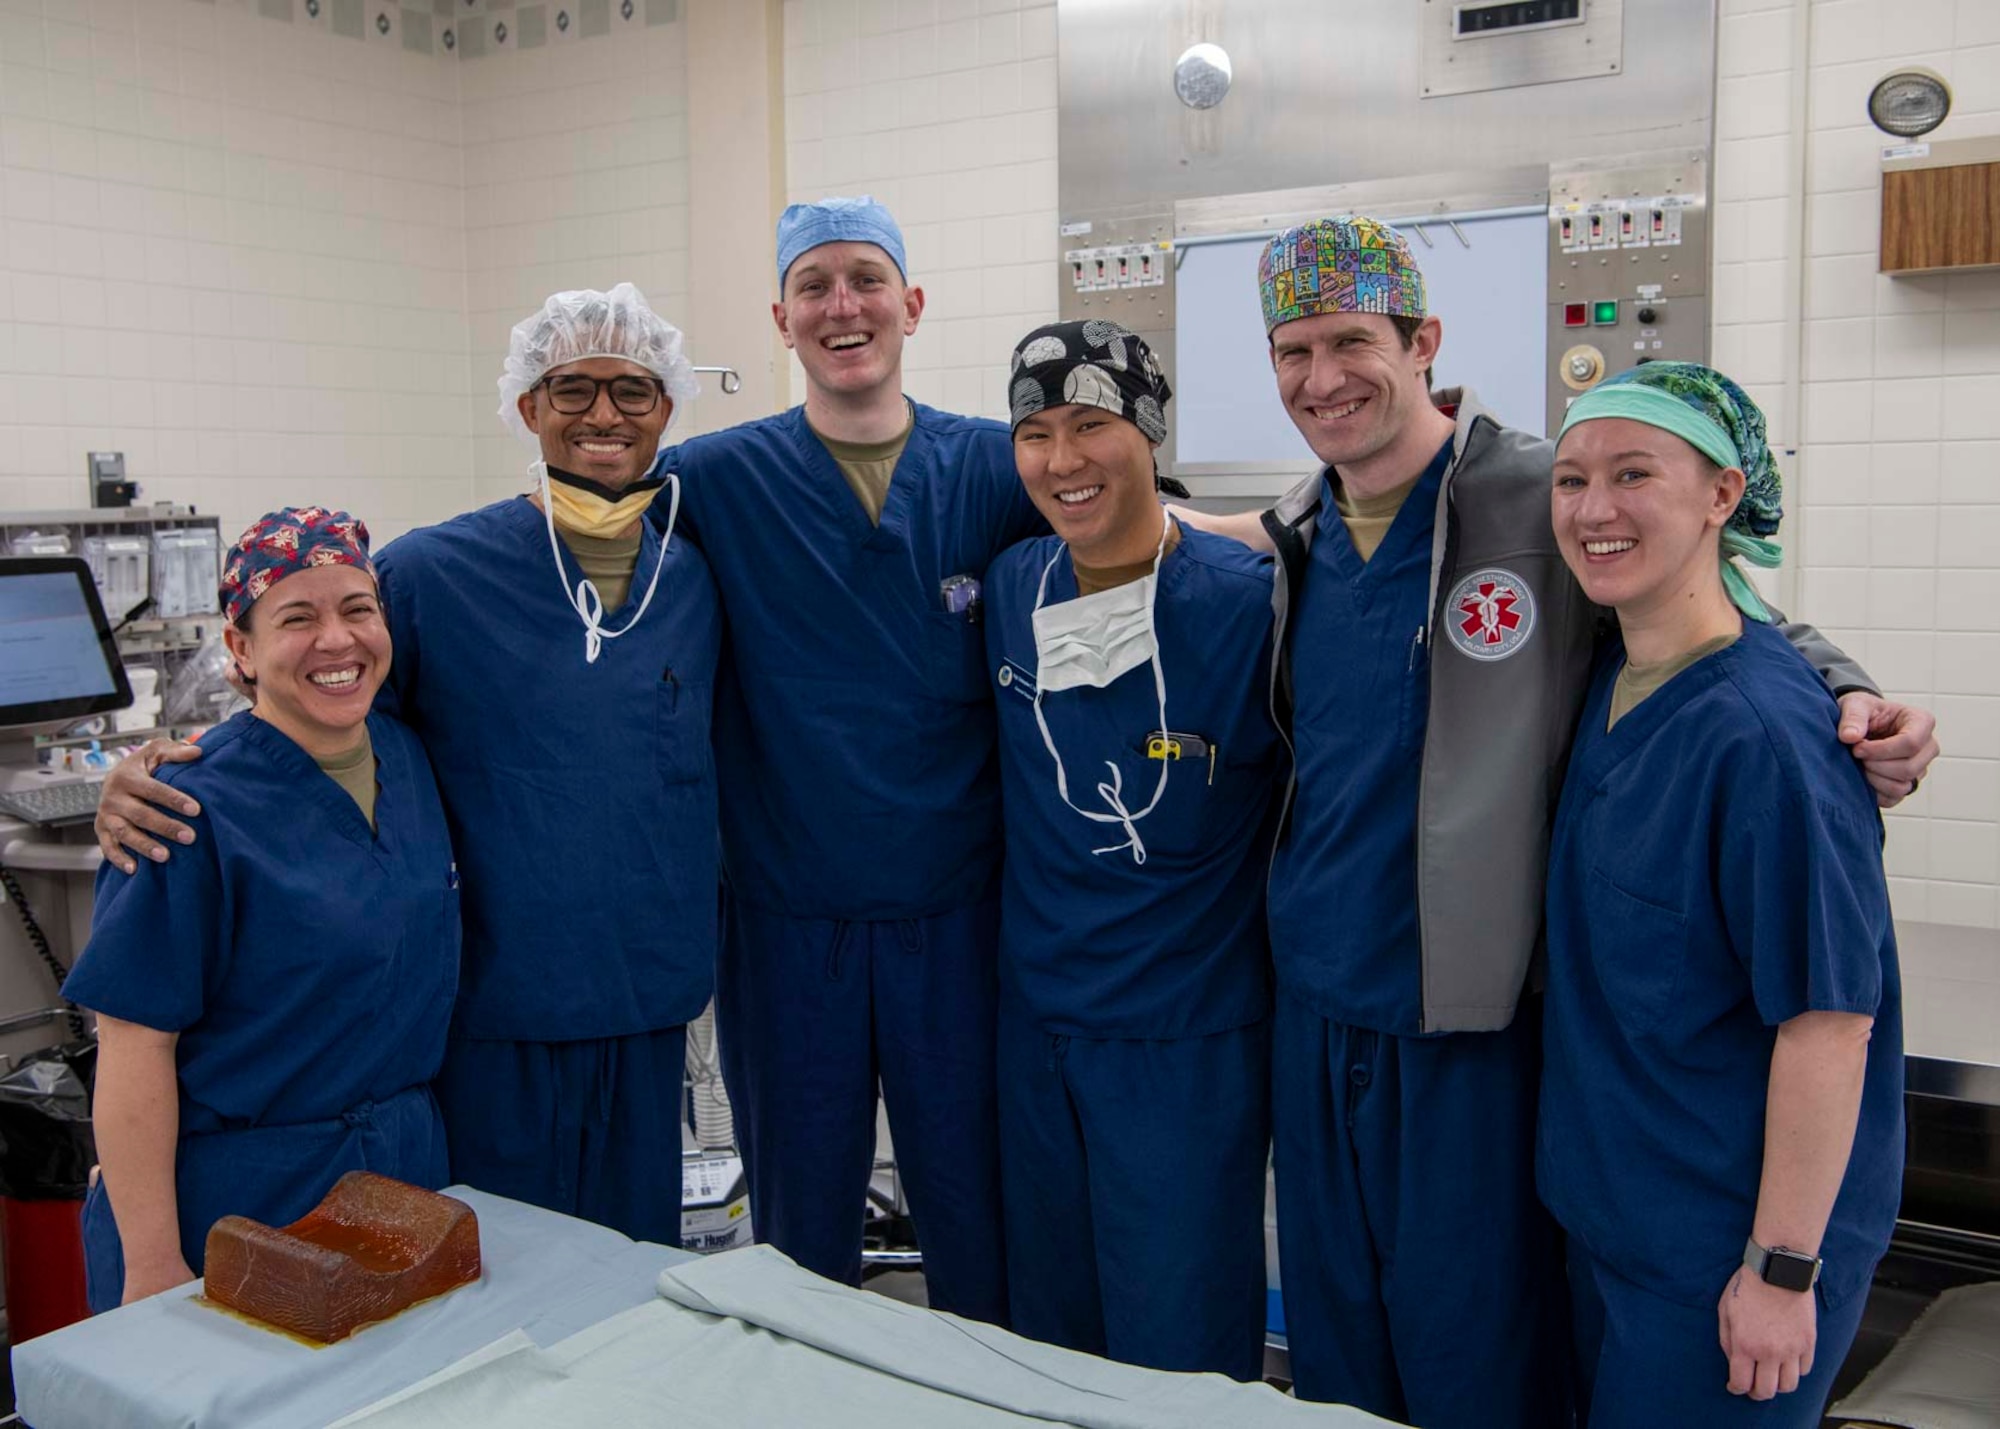 A group of medical staff pose for a photo together in an operating room.